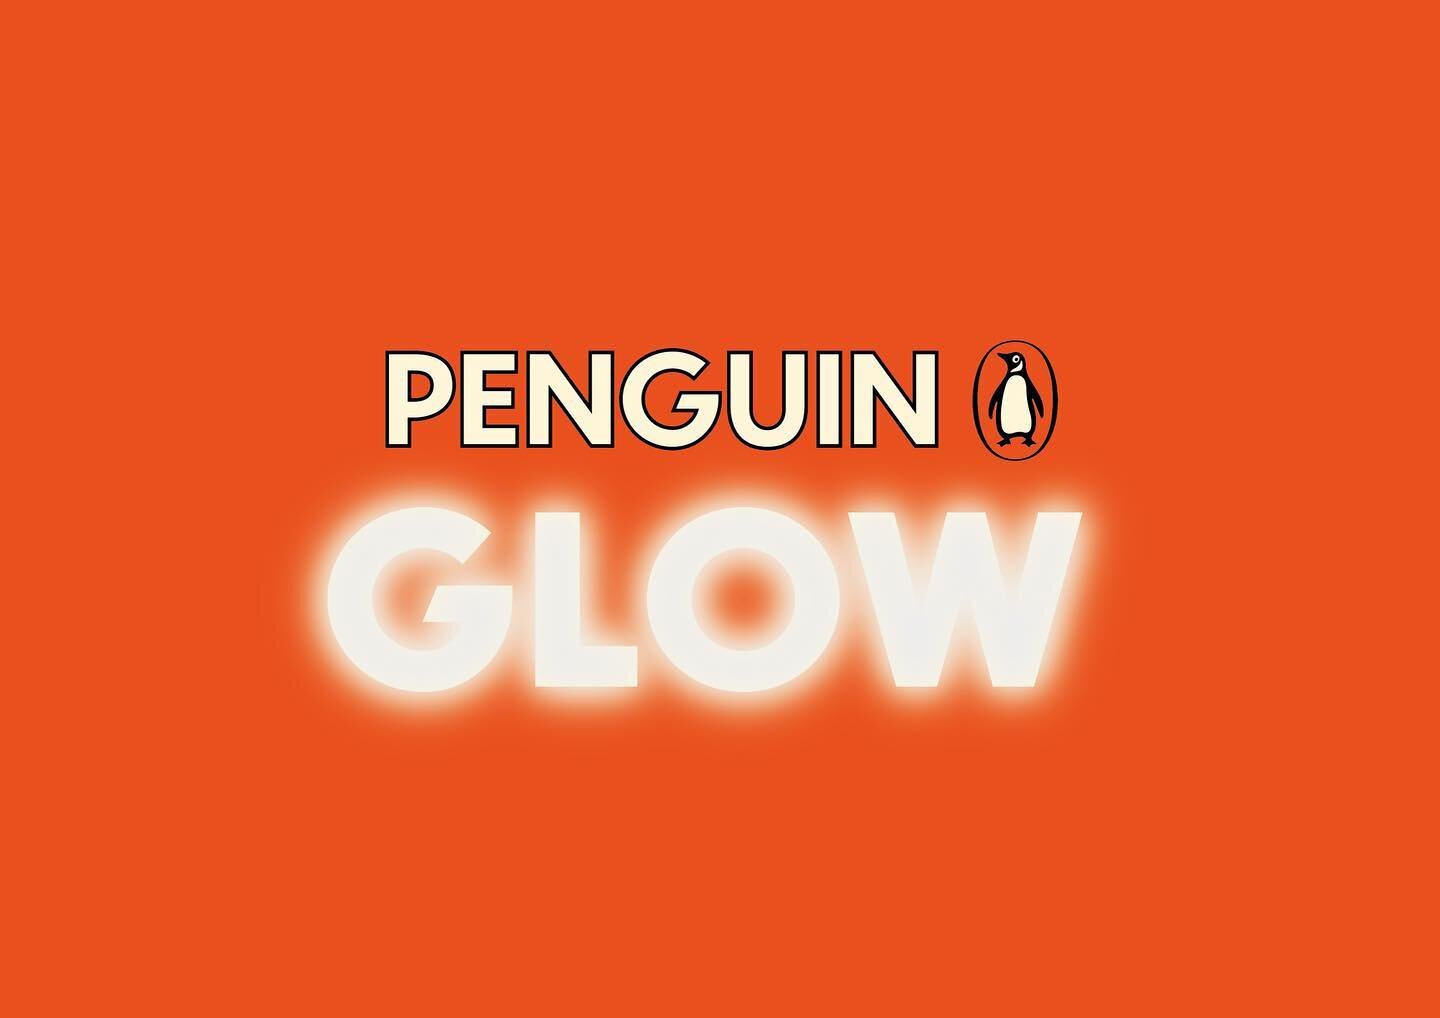 D&amp;AD New Blood Pencil Winner ✏️ Glow: A response to Penguin&rsquo;s merchandise brief.